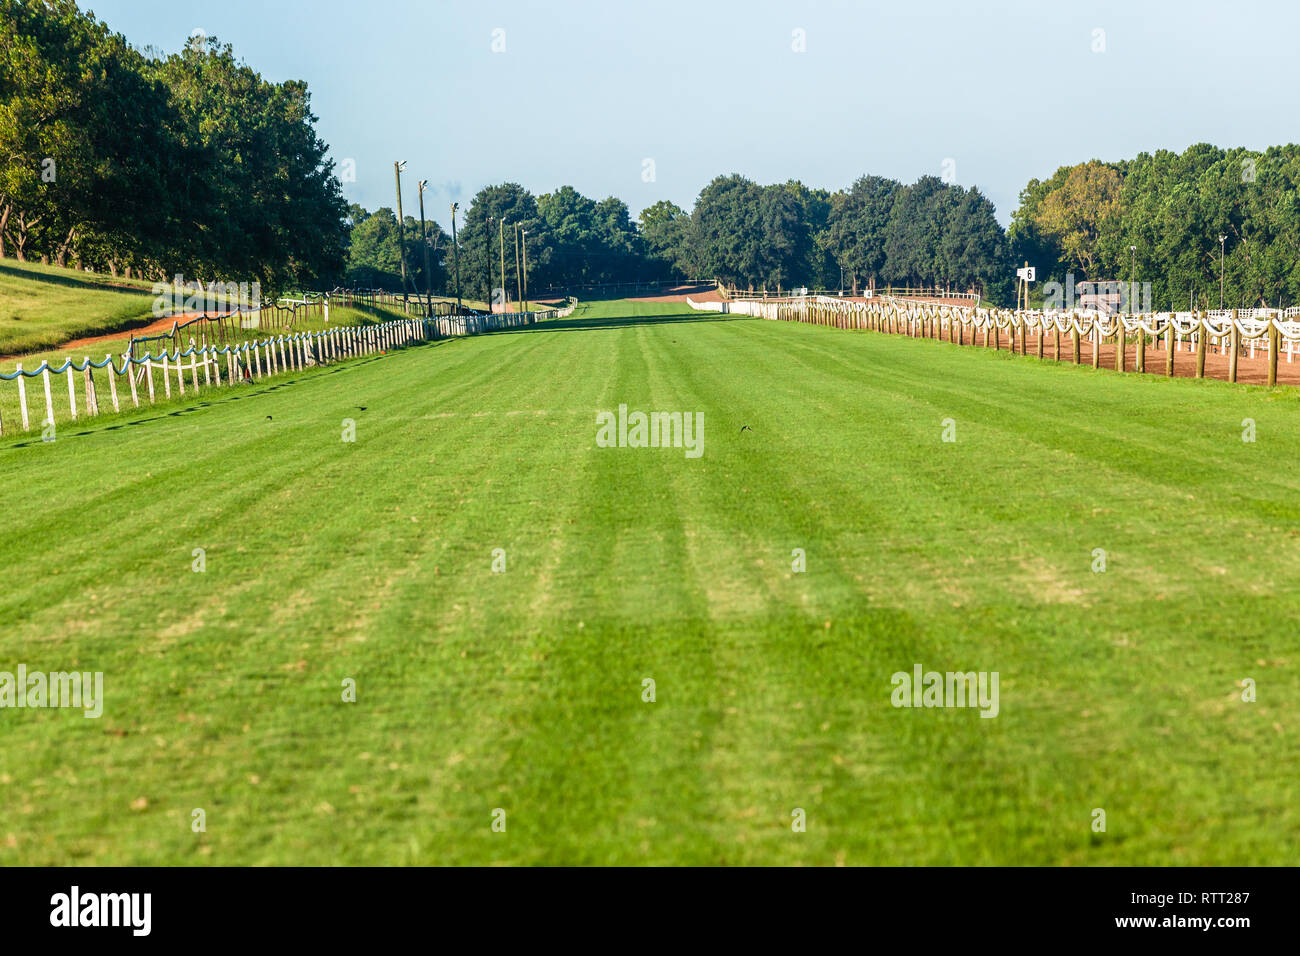 Horse race grass training  track railing fence blue sky equestrian countryside landscape. Stock Photo